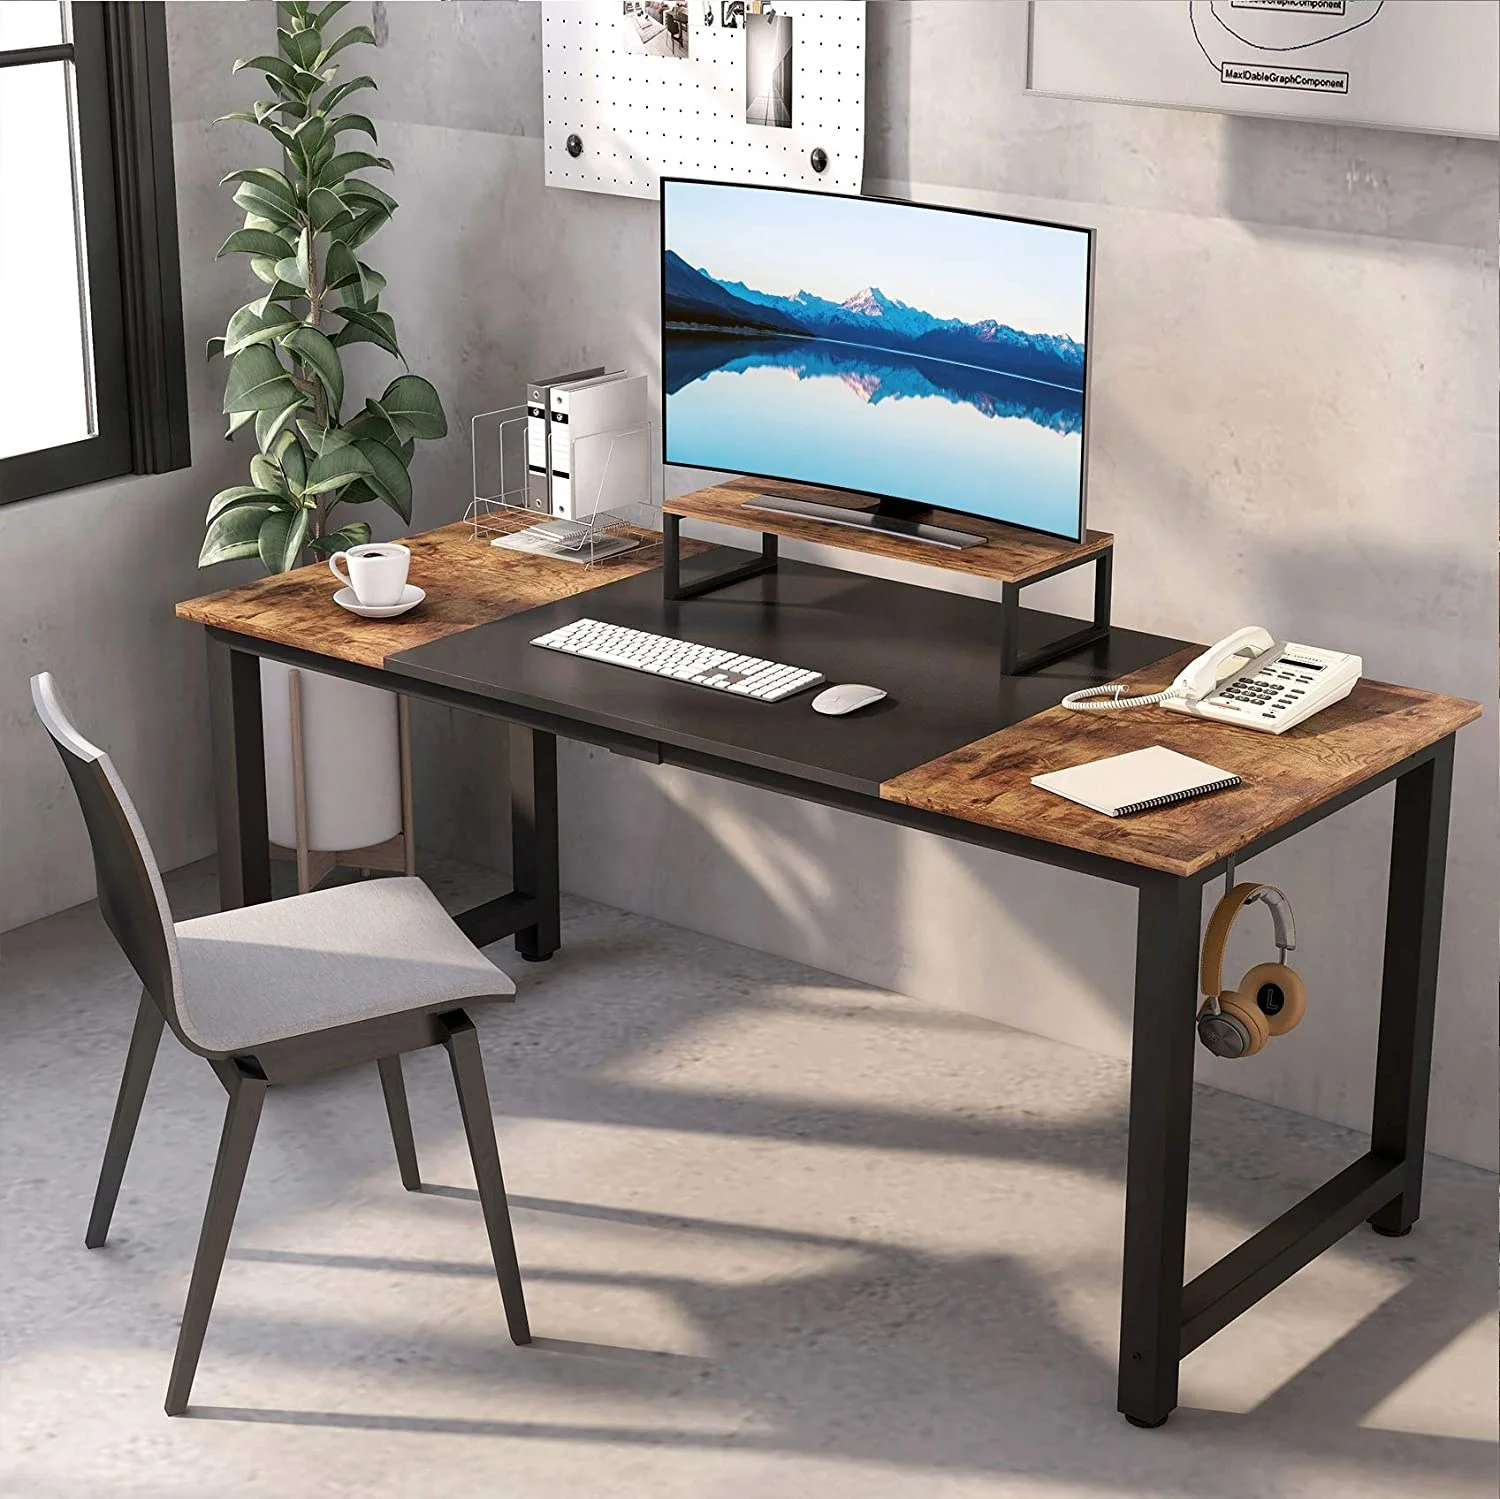 55/47" Computer Desk PC Table Study Writing Desk Workstation for Home Office HOT 